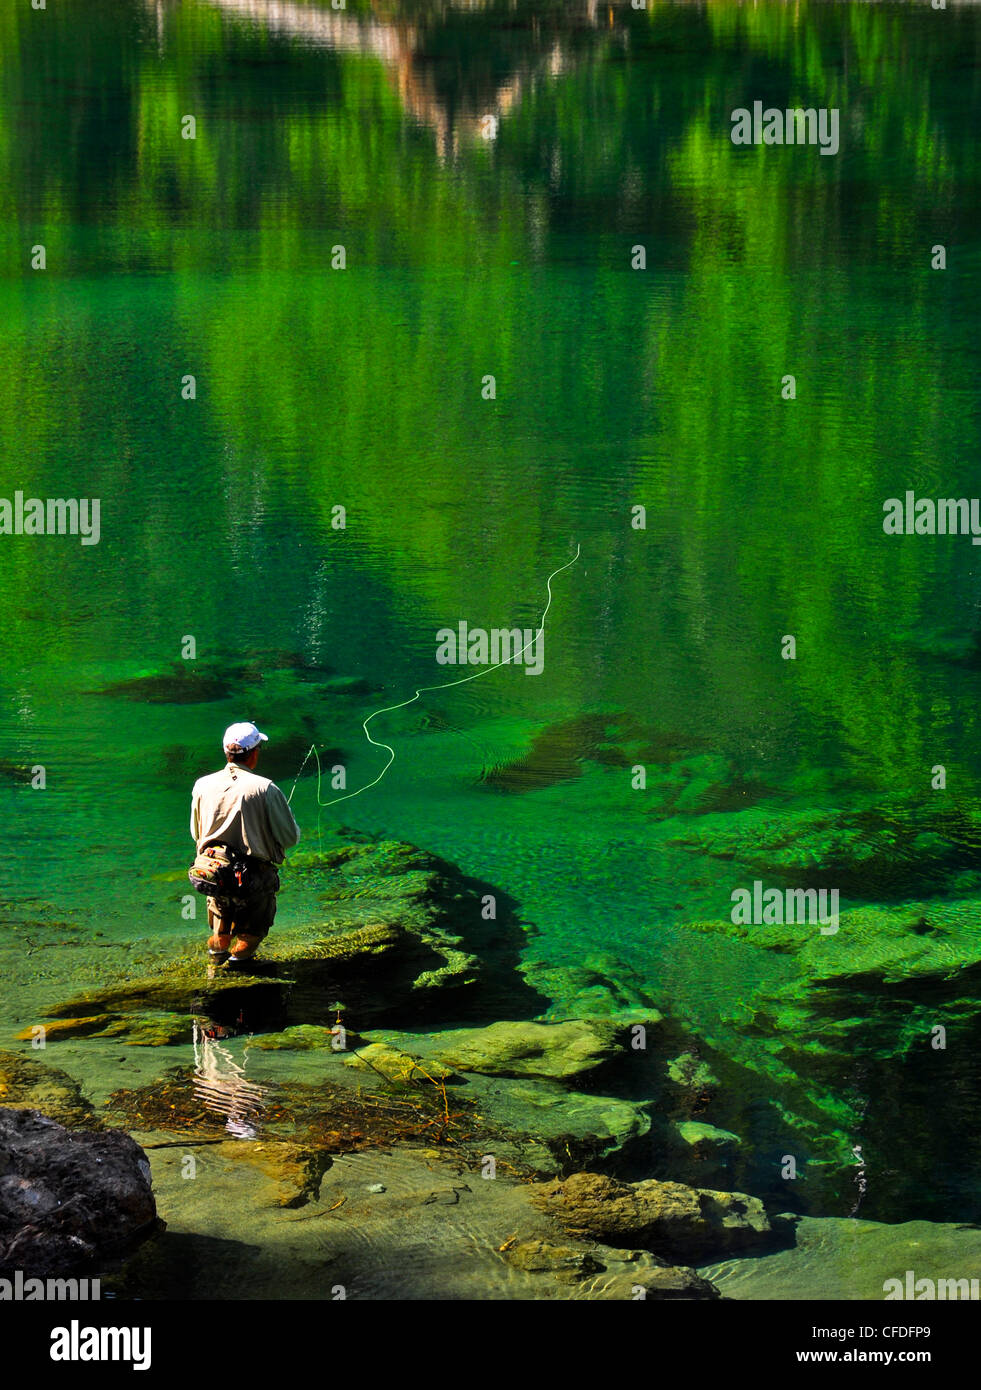 Man fly fishing, Vancouver Island Stamp River, British Columbia